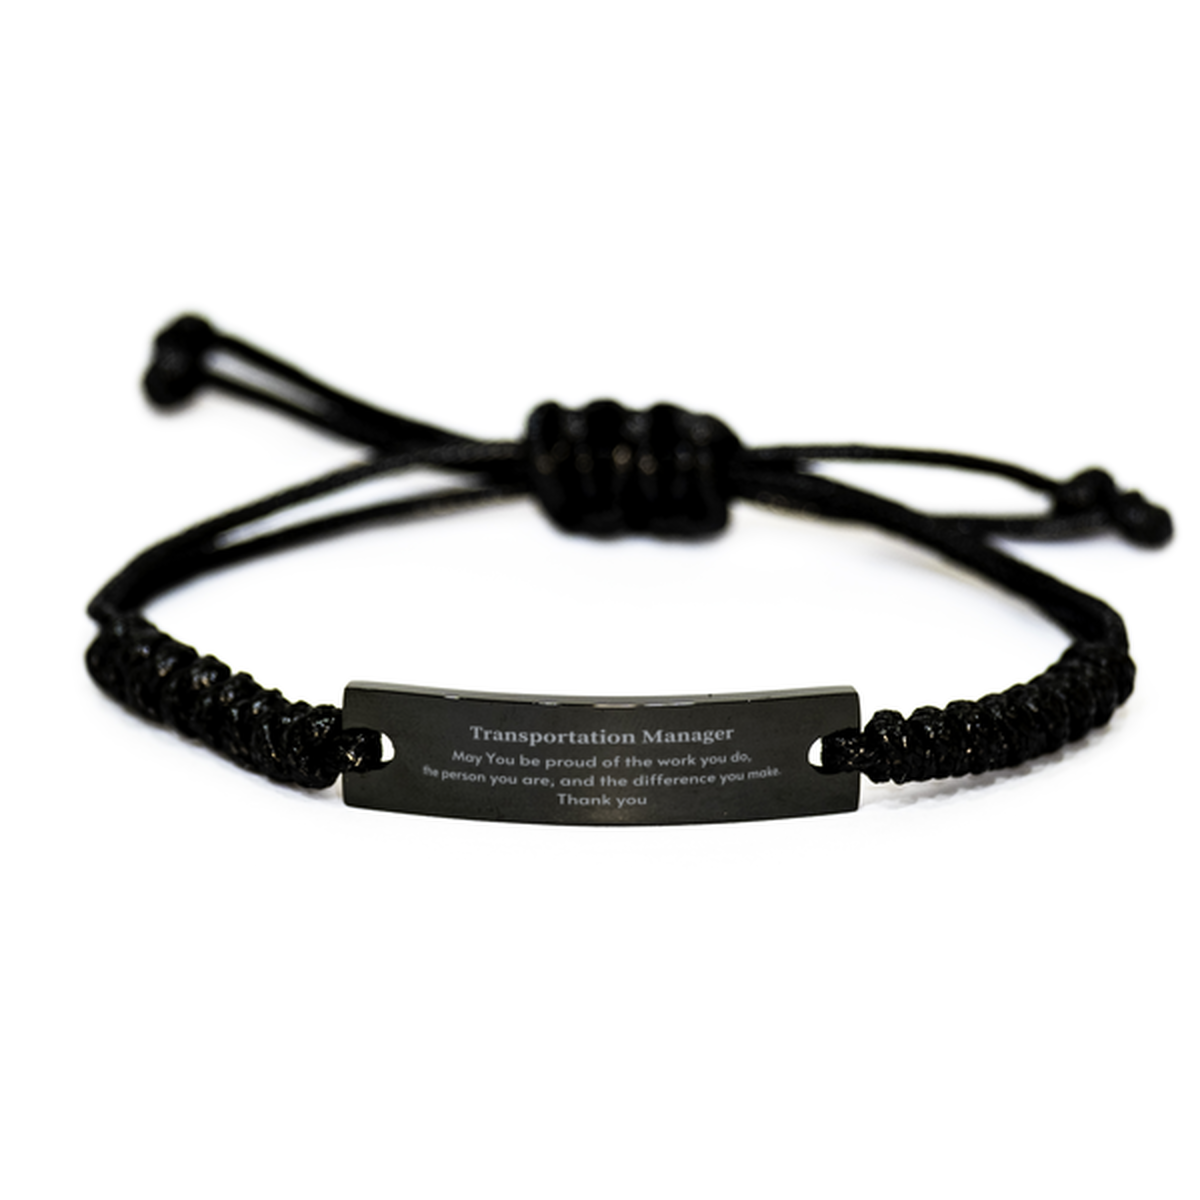 Heartwarming Black Rope Bracelet Retirement Coworkers Gifts for Transportation Manager, Transportation Manager May You be proud of the work you do, the person you are Gifts for Boss Men Women Friends